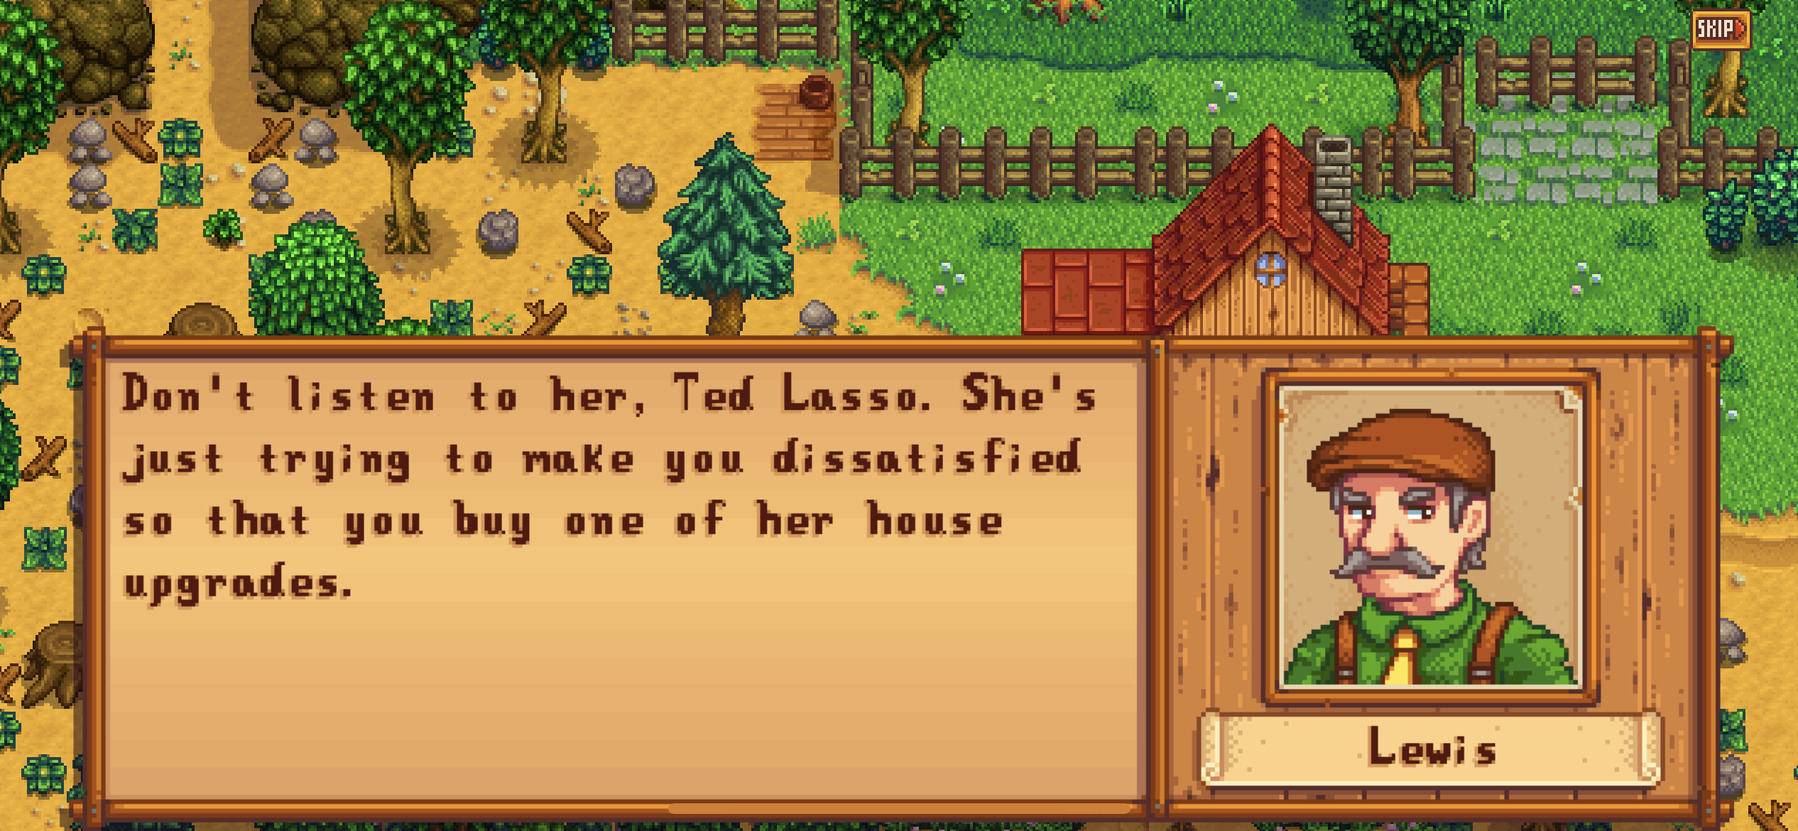 Screenshot of Stardew valley for iOS with the caption “Don't listen to her, Ted Lasso. She's just trying to make you dissatisfied so that you buy one of her house upgrades.&10;Lewis”